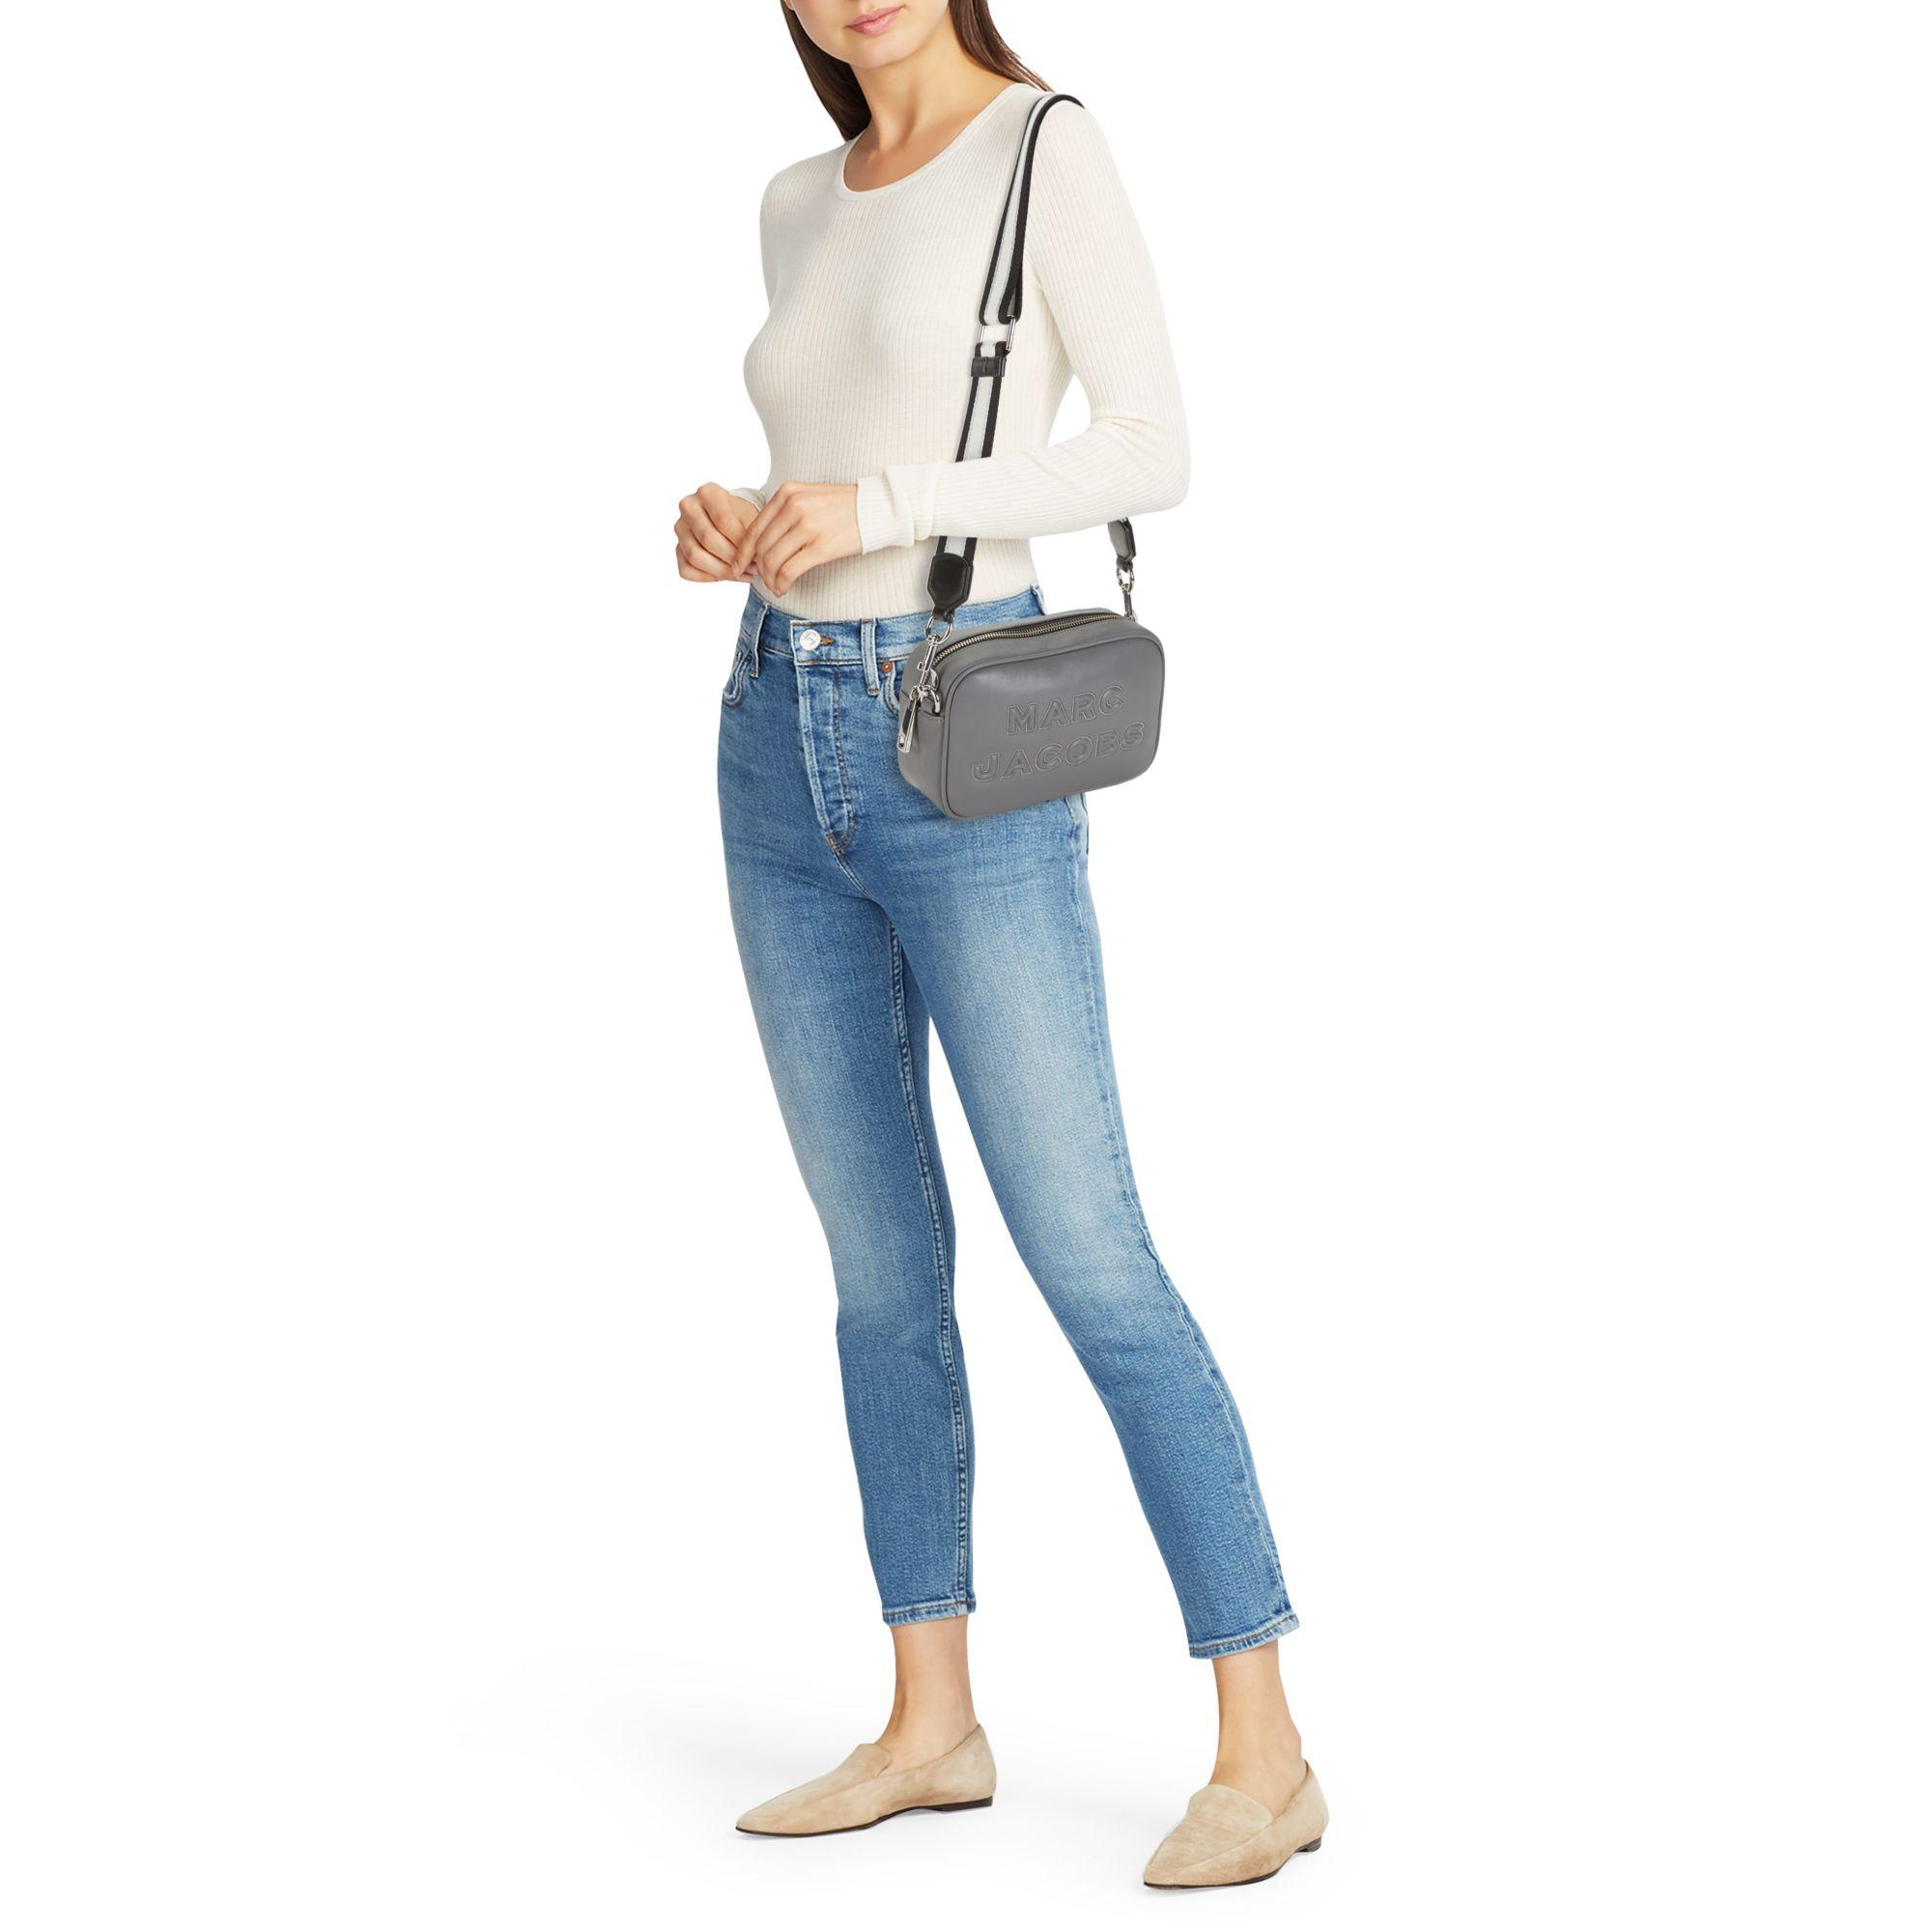 Marc Jacobs Flash Leather Crossbody in Grey (Gray) - Lyst